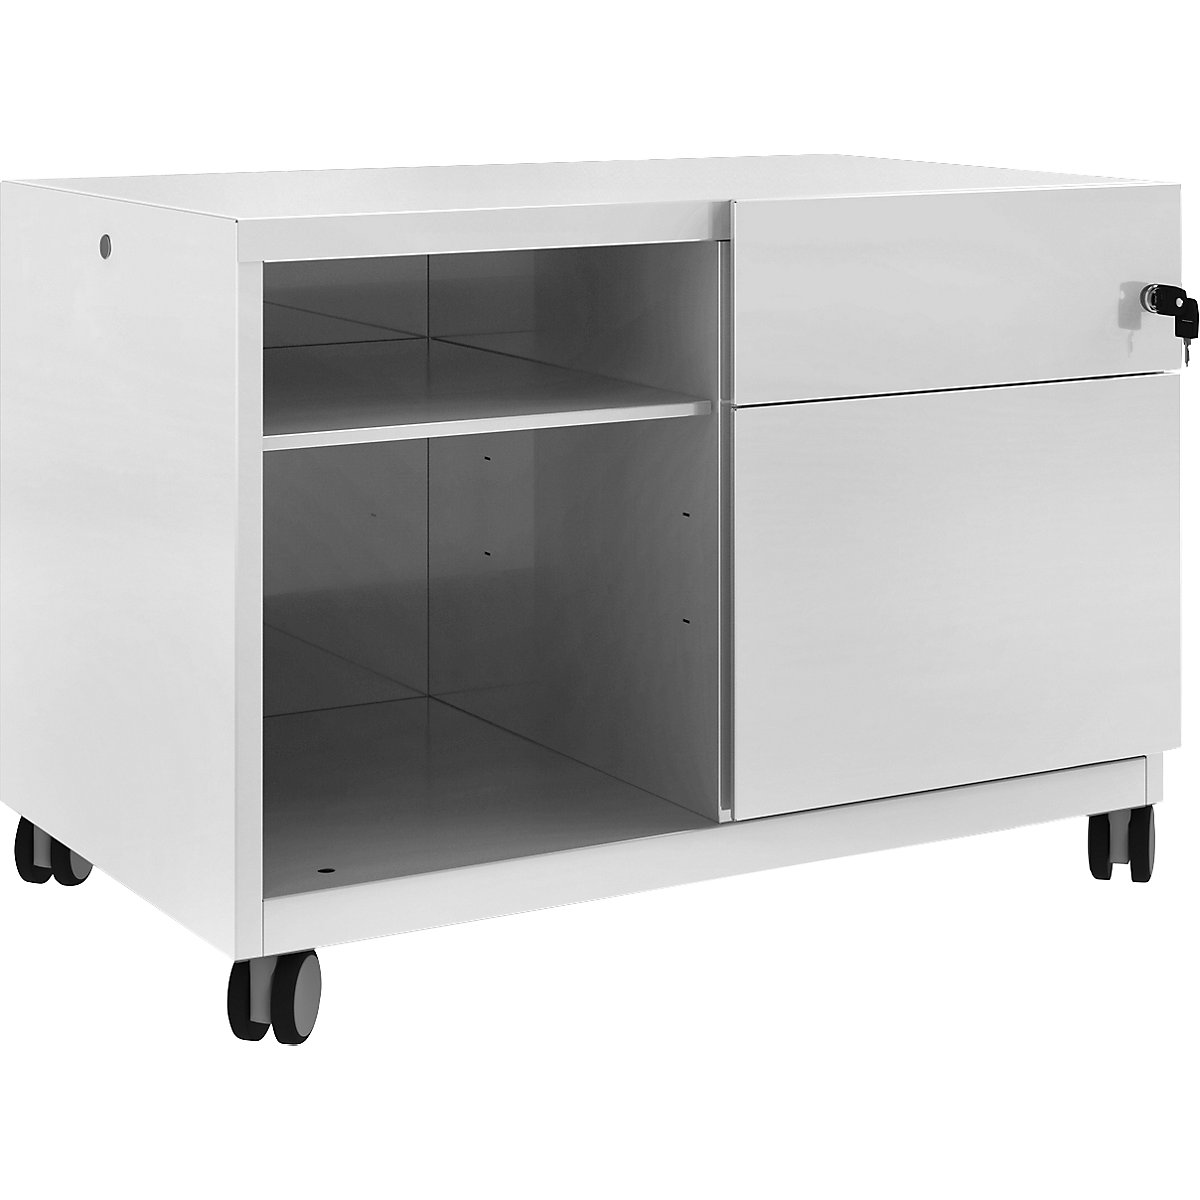 Note™ CADDY, HxBxT 563 x 800 x 490 mm – BISLEY, 1 universal drawer and suspension file drawer on the right, light grey-24